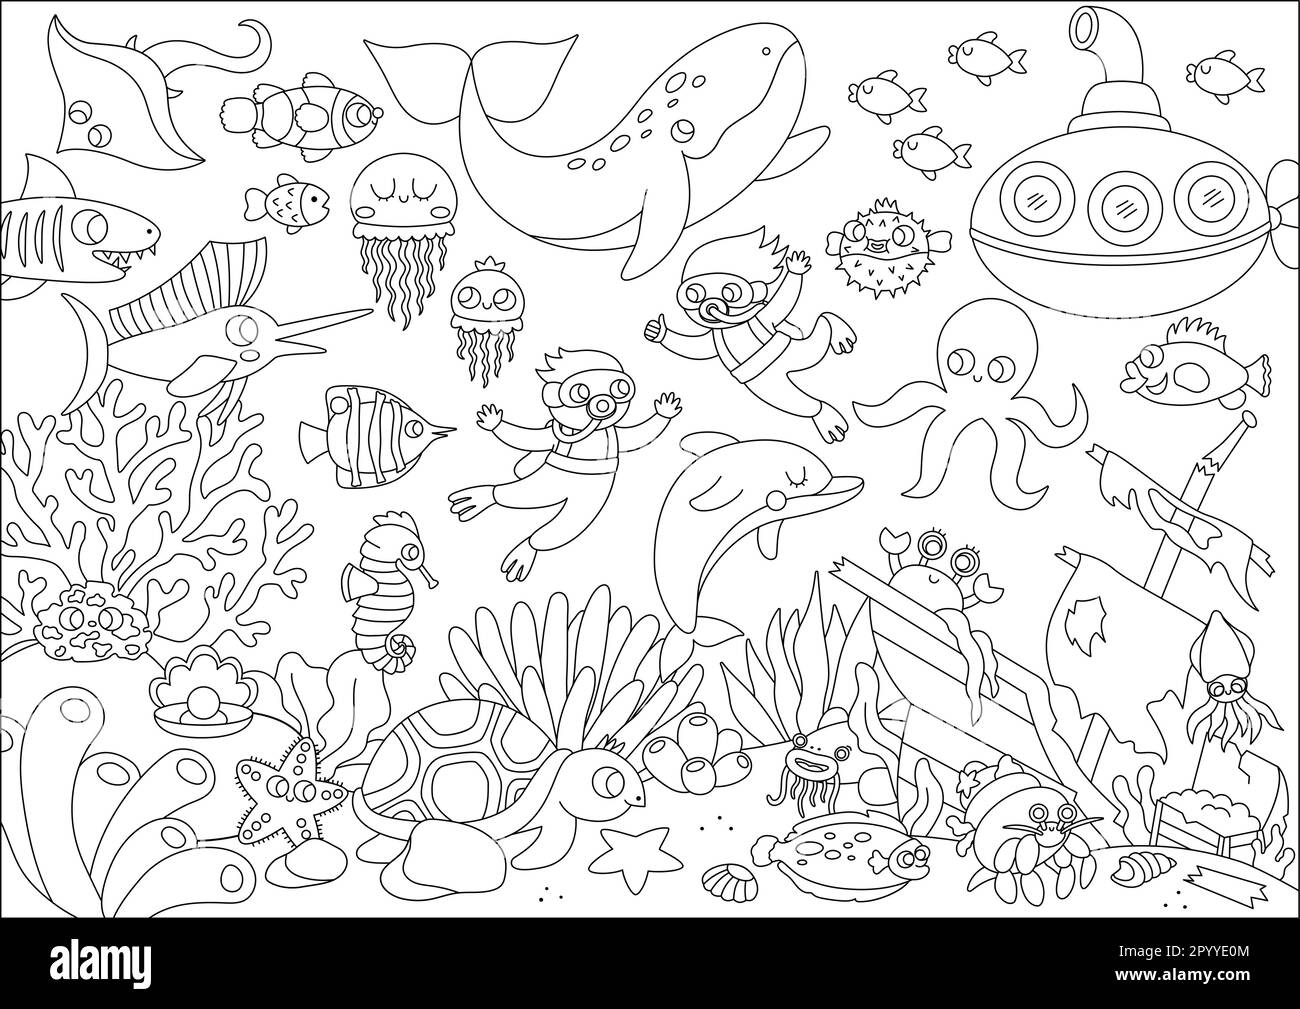 Vector black and white under the sea landscape illustration. Ocean life line scene with animals, dolphin, whale, submarine, divers, wrecked ship. Hori Stock Vector